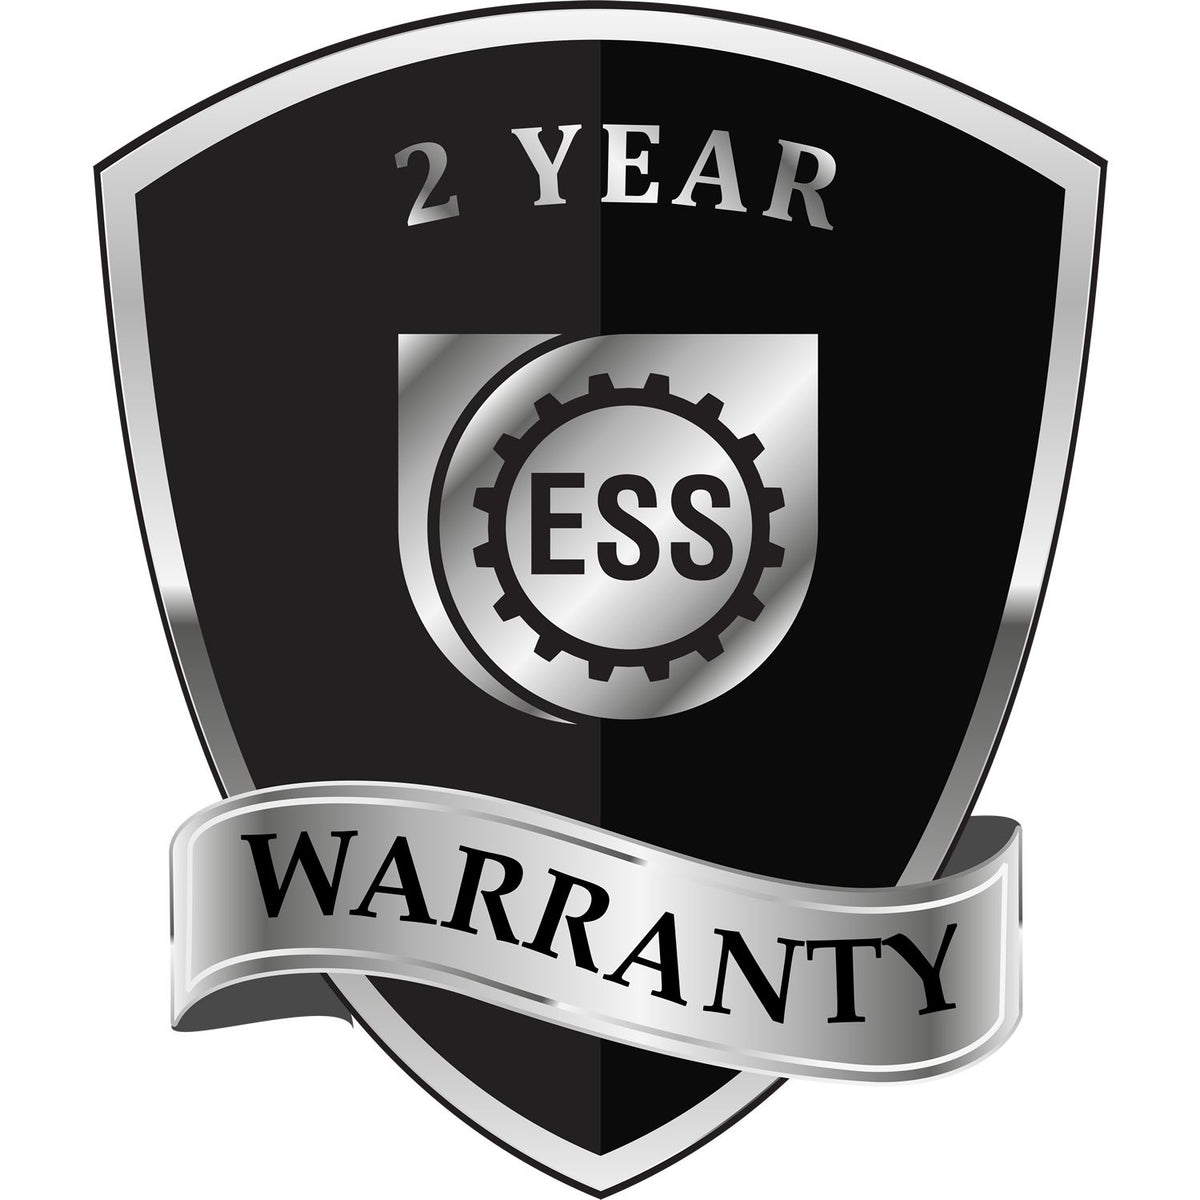 A black and silver badge or emblem showing warranty information for the Soft Utah Professional Geologist Seal